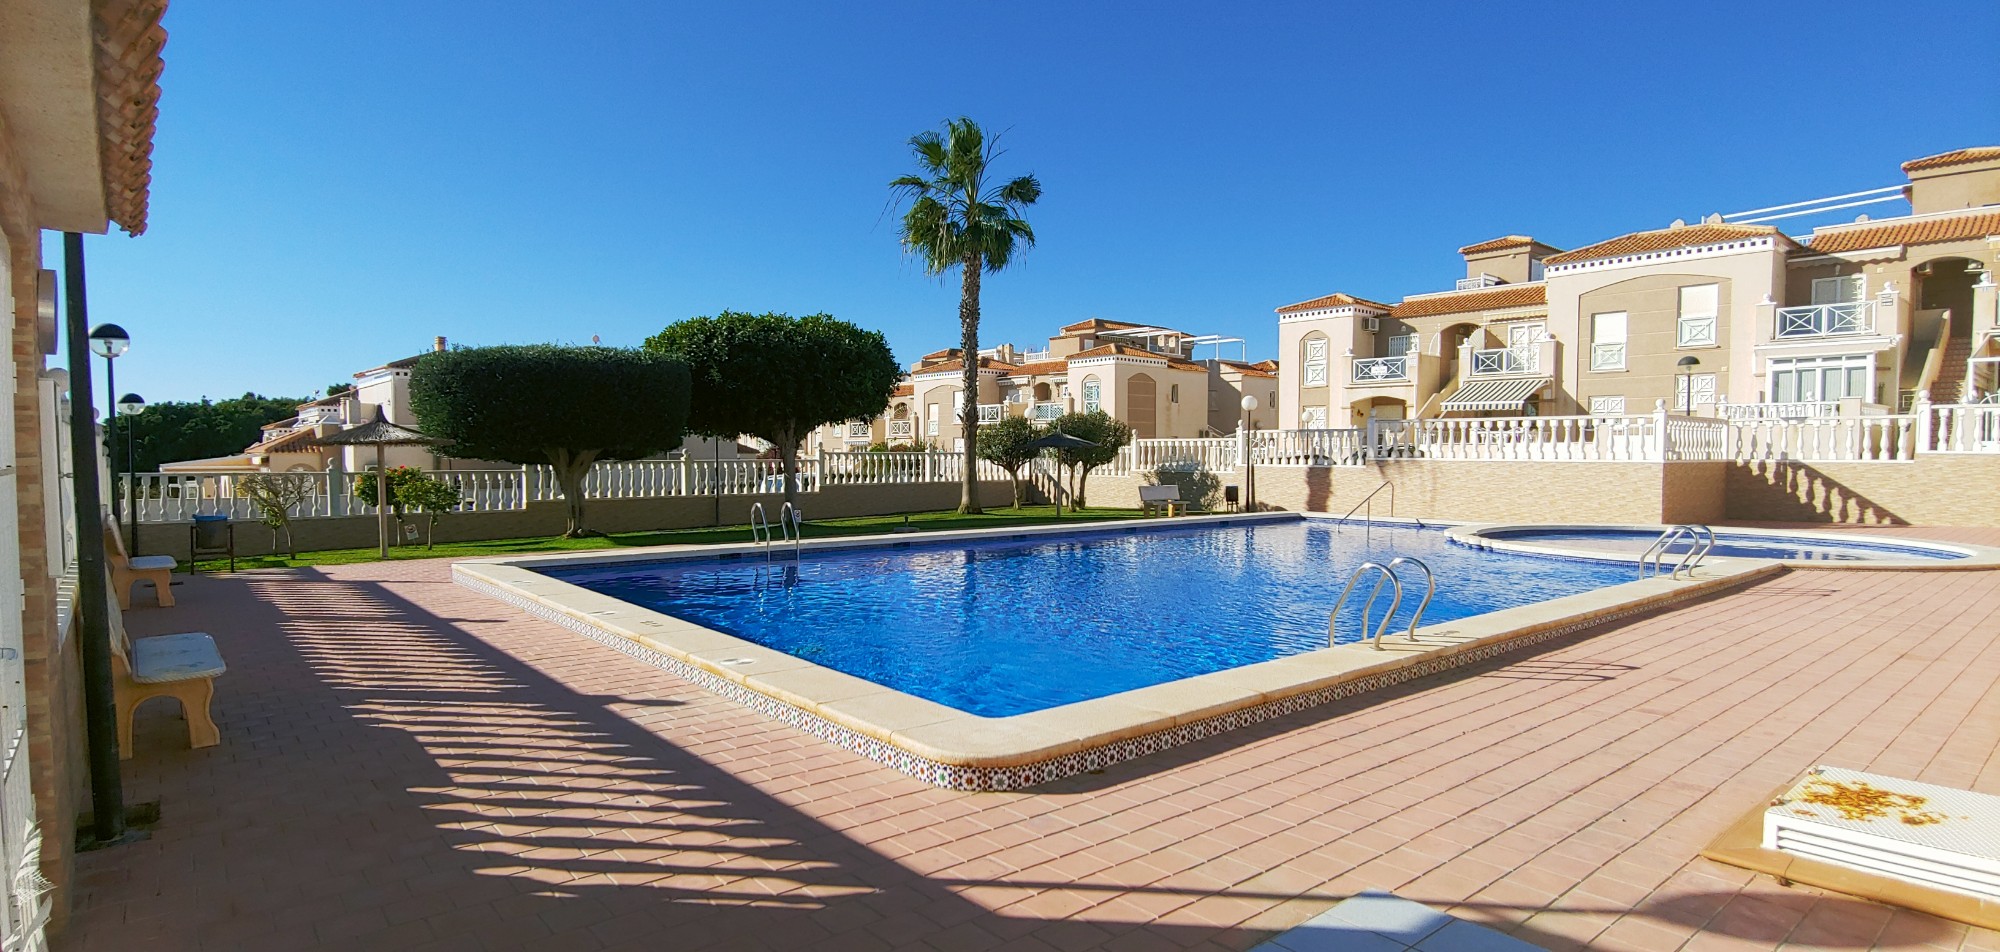 4 Bed, 2 Bath, Chalet in Torrevieja